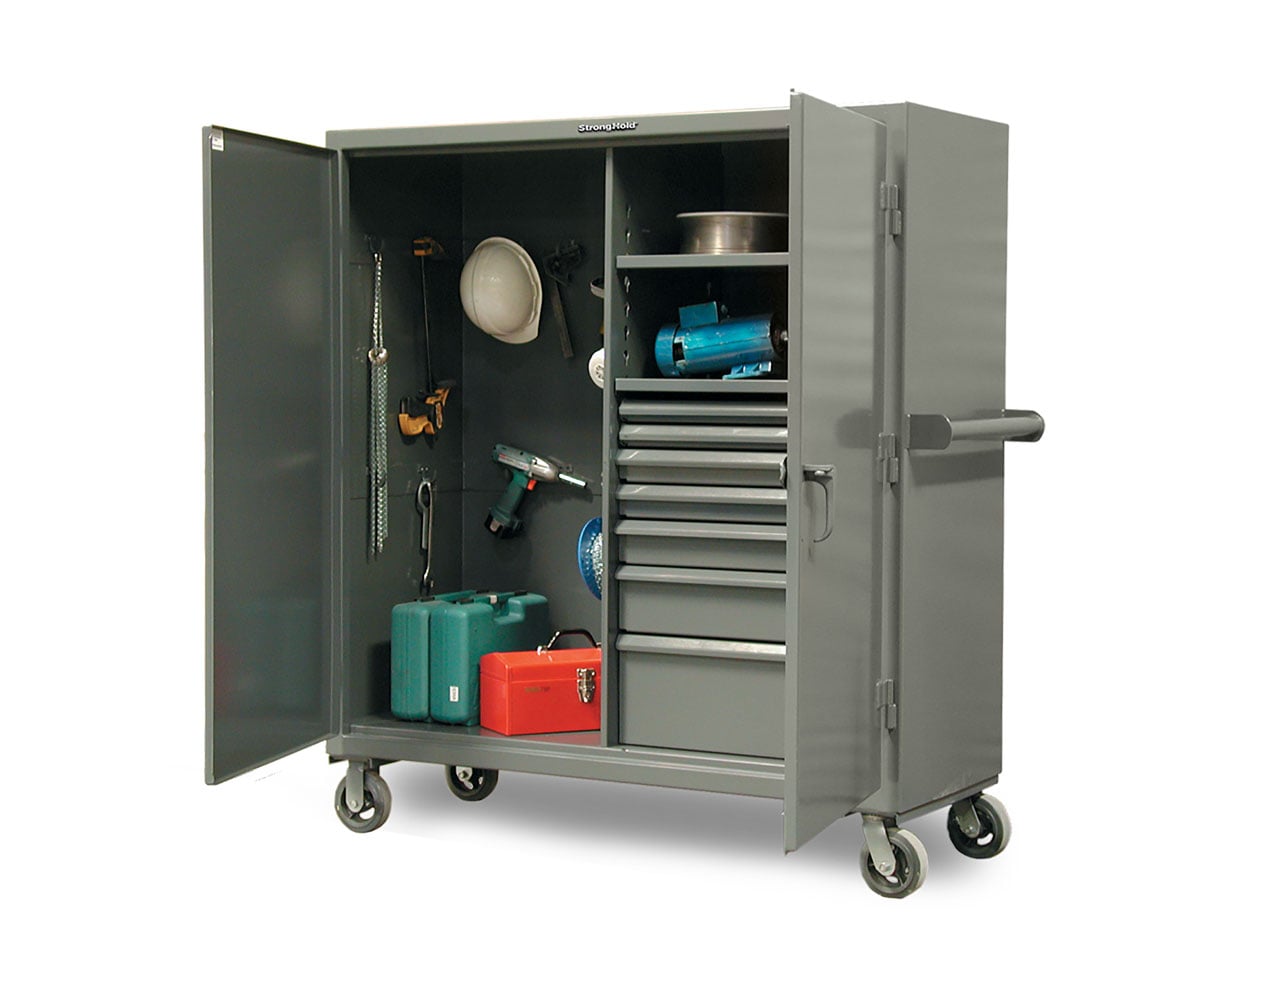 Extreme Duty 12 GA Mobile Rigging Cabinet with 7 Half-Width Drawers, 2 Shelves - 36 in. W x 24 in. D x 68 in. H